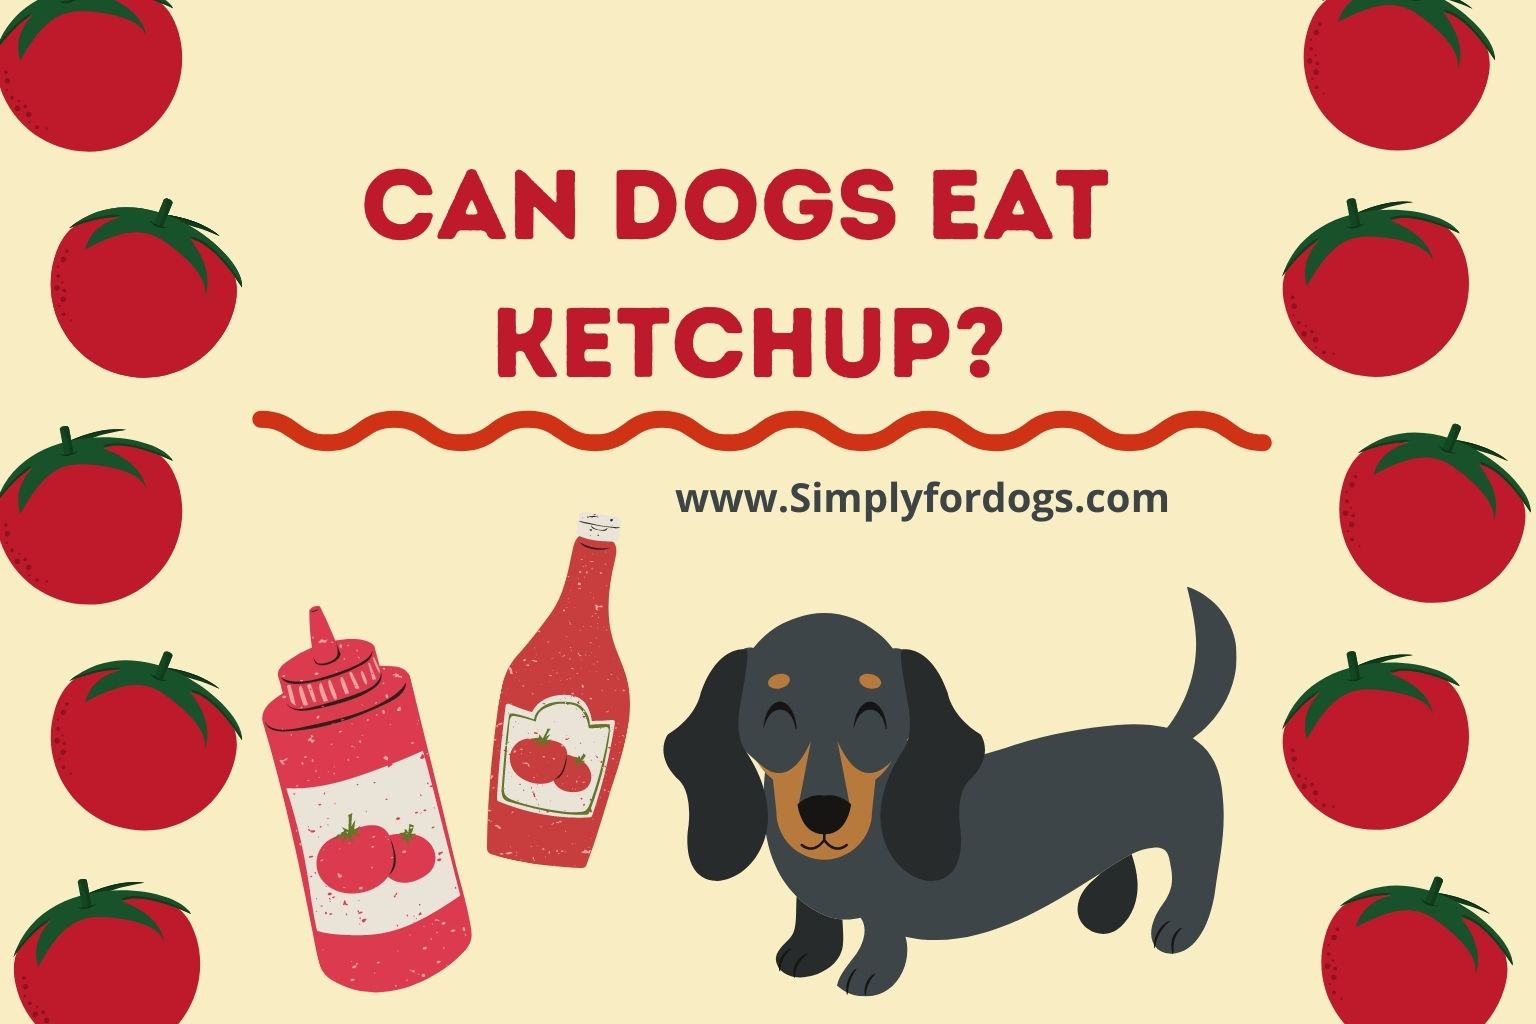 Can-dogs-eat-ketchup